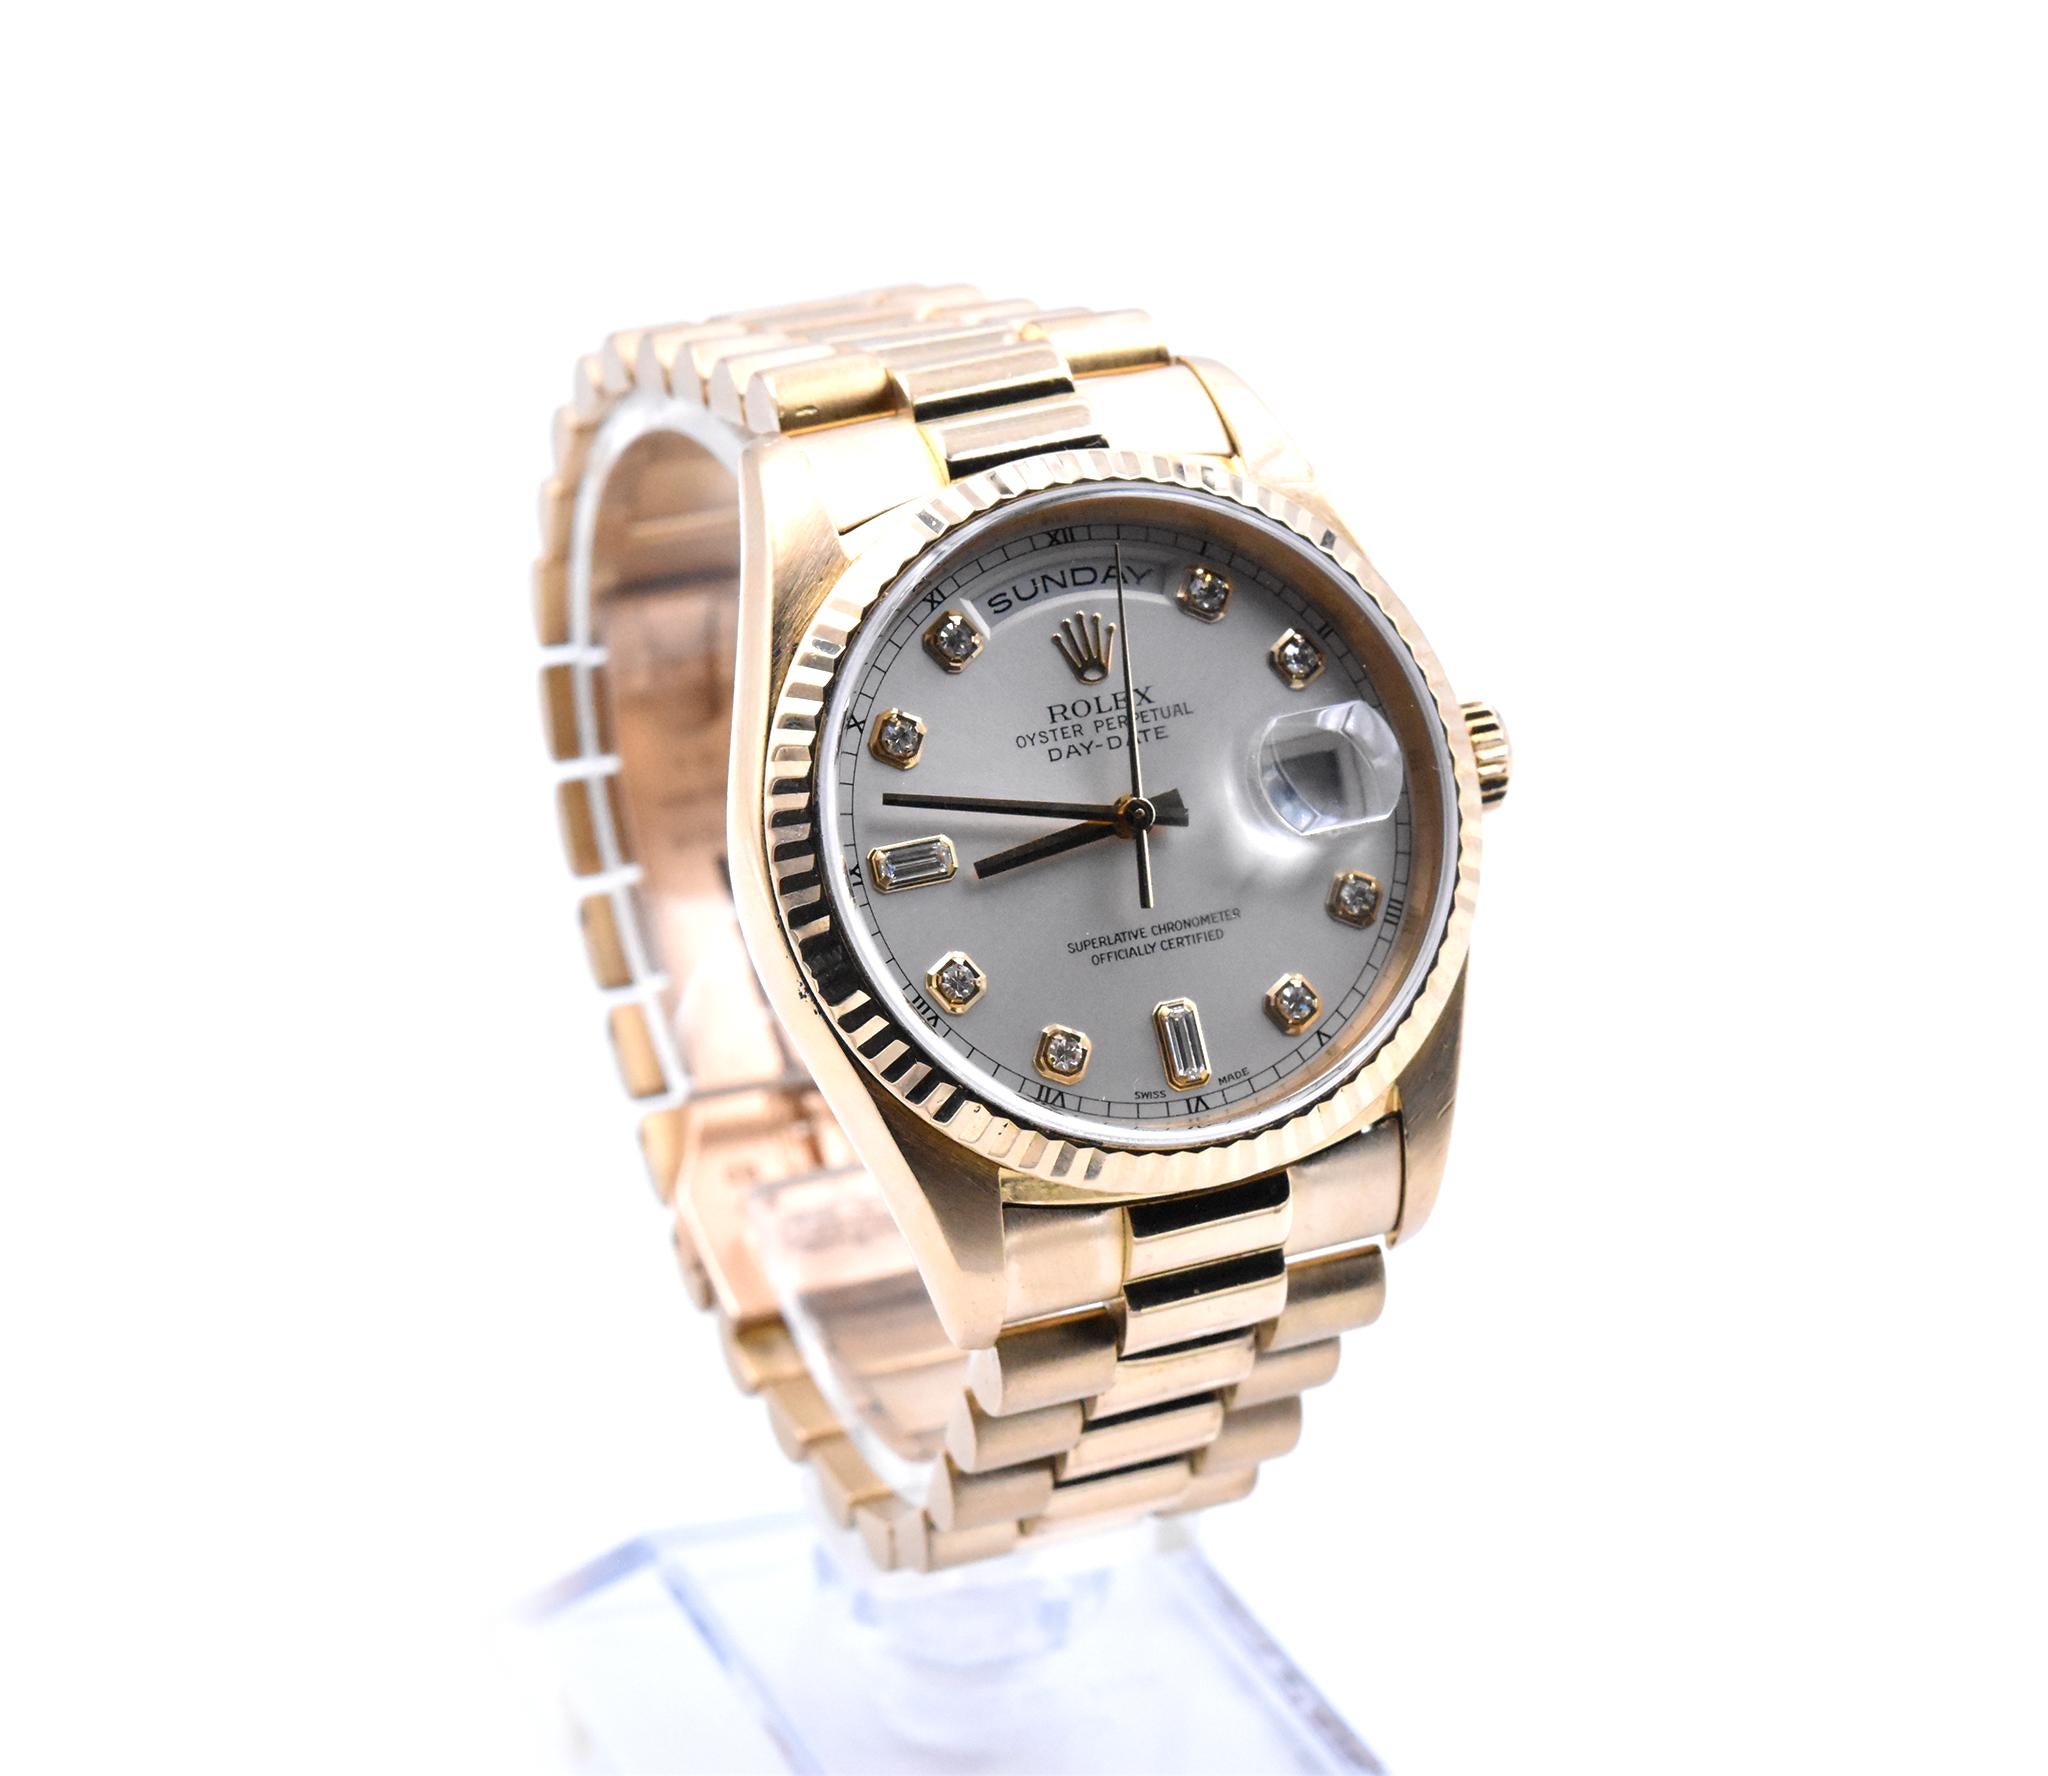 Movement: automatic
Function: seconds, minutes, hours, day, date
Case: 36mm 18k yellow gold case,fluted bezel, scratch resistant sapphire crystal
Band: 18k yellow gold Rolex President bracelet
Dial: factory diamond dial with round and baguettes,